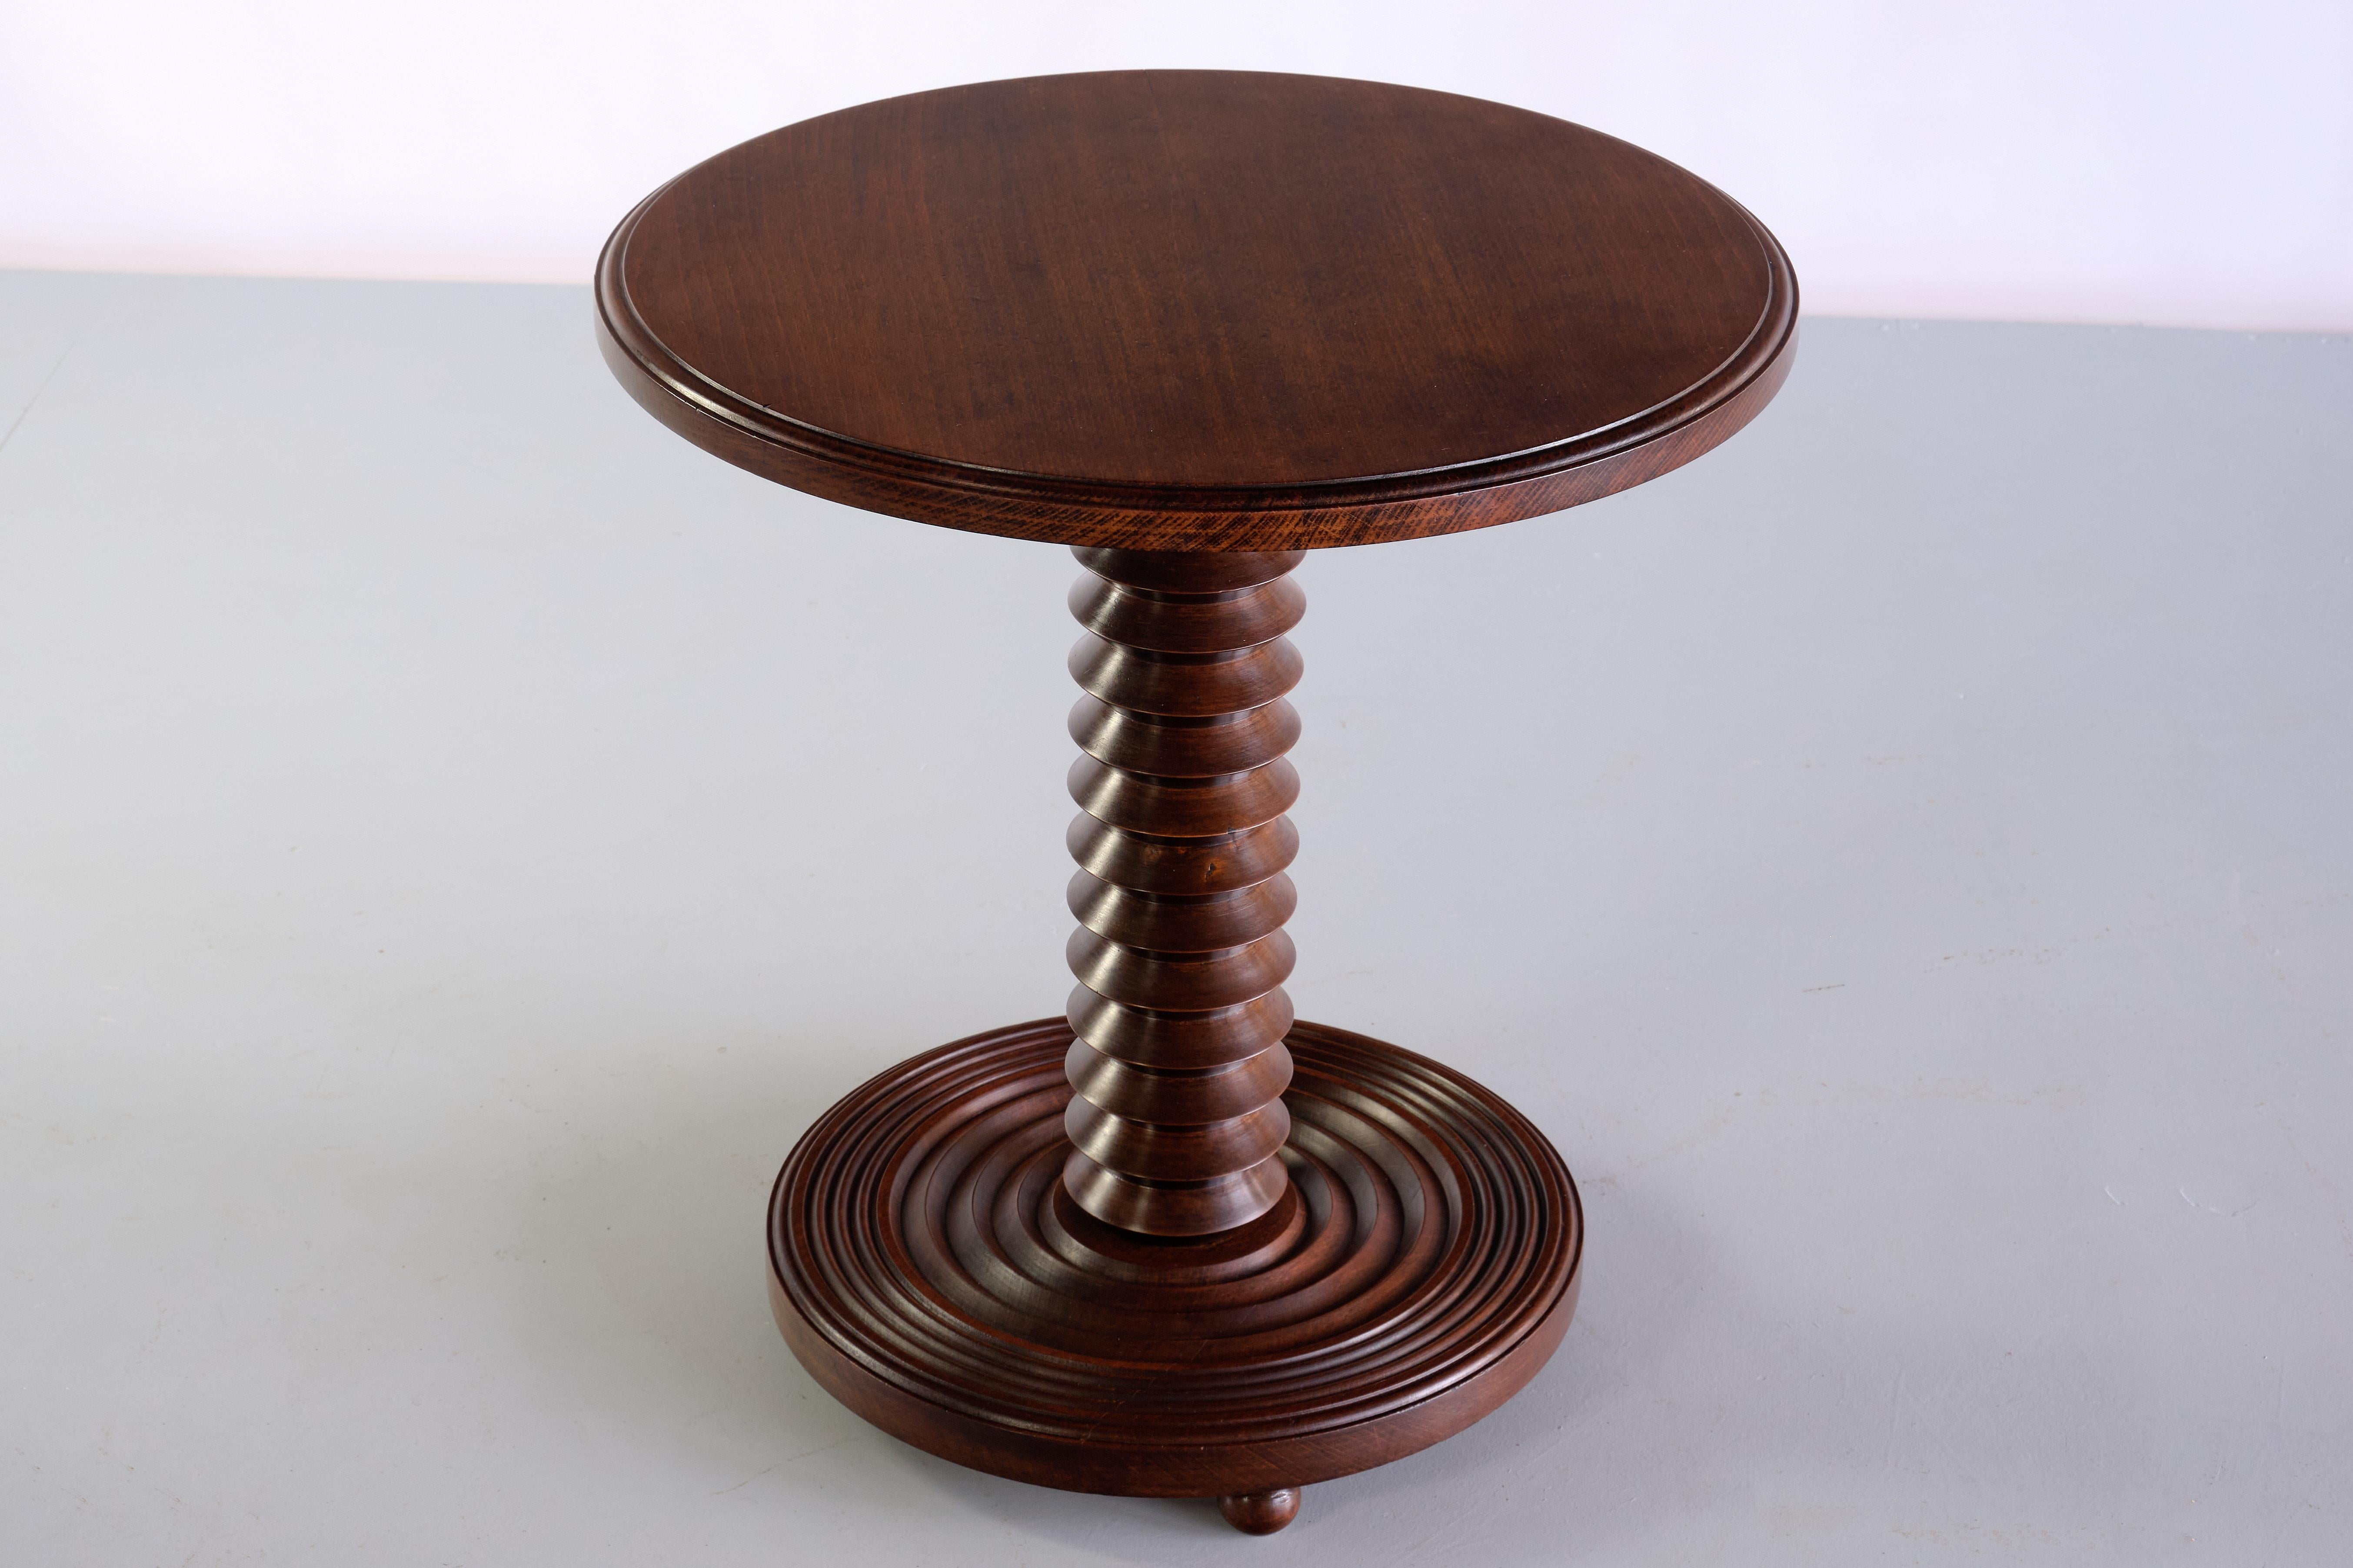 This striking side table was designed by Charles Dudouyt and produced in France in the late 1940s. The round top in solid dark stained oak with a rounded edge. The striking centred column is in turned oak wood, creating a grooved spiral pattern. The